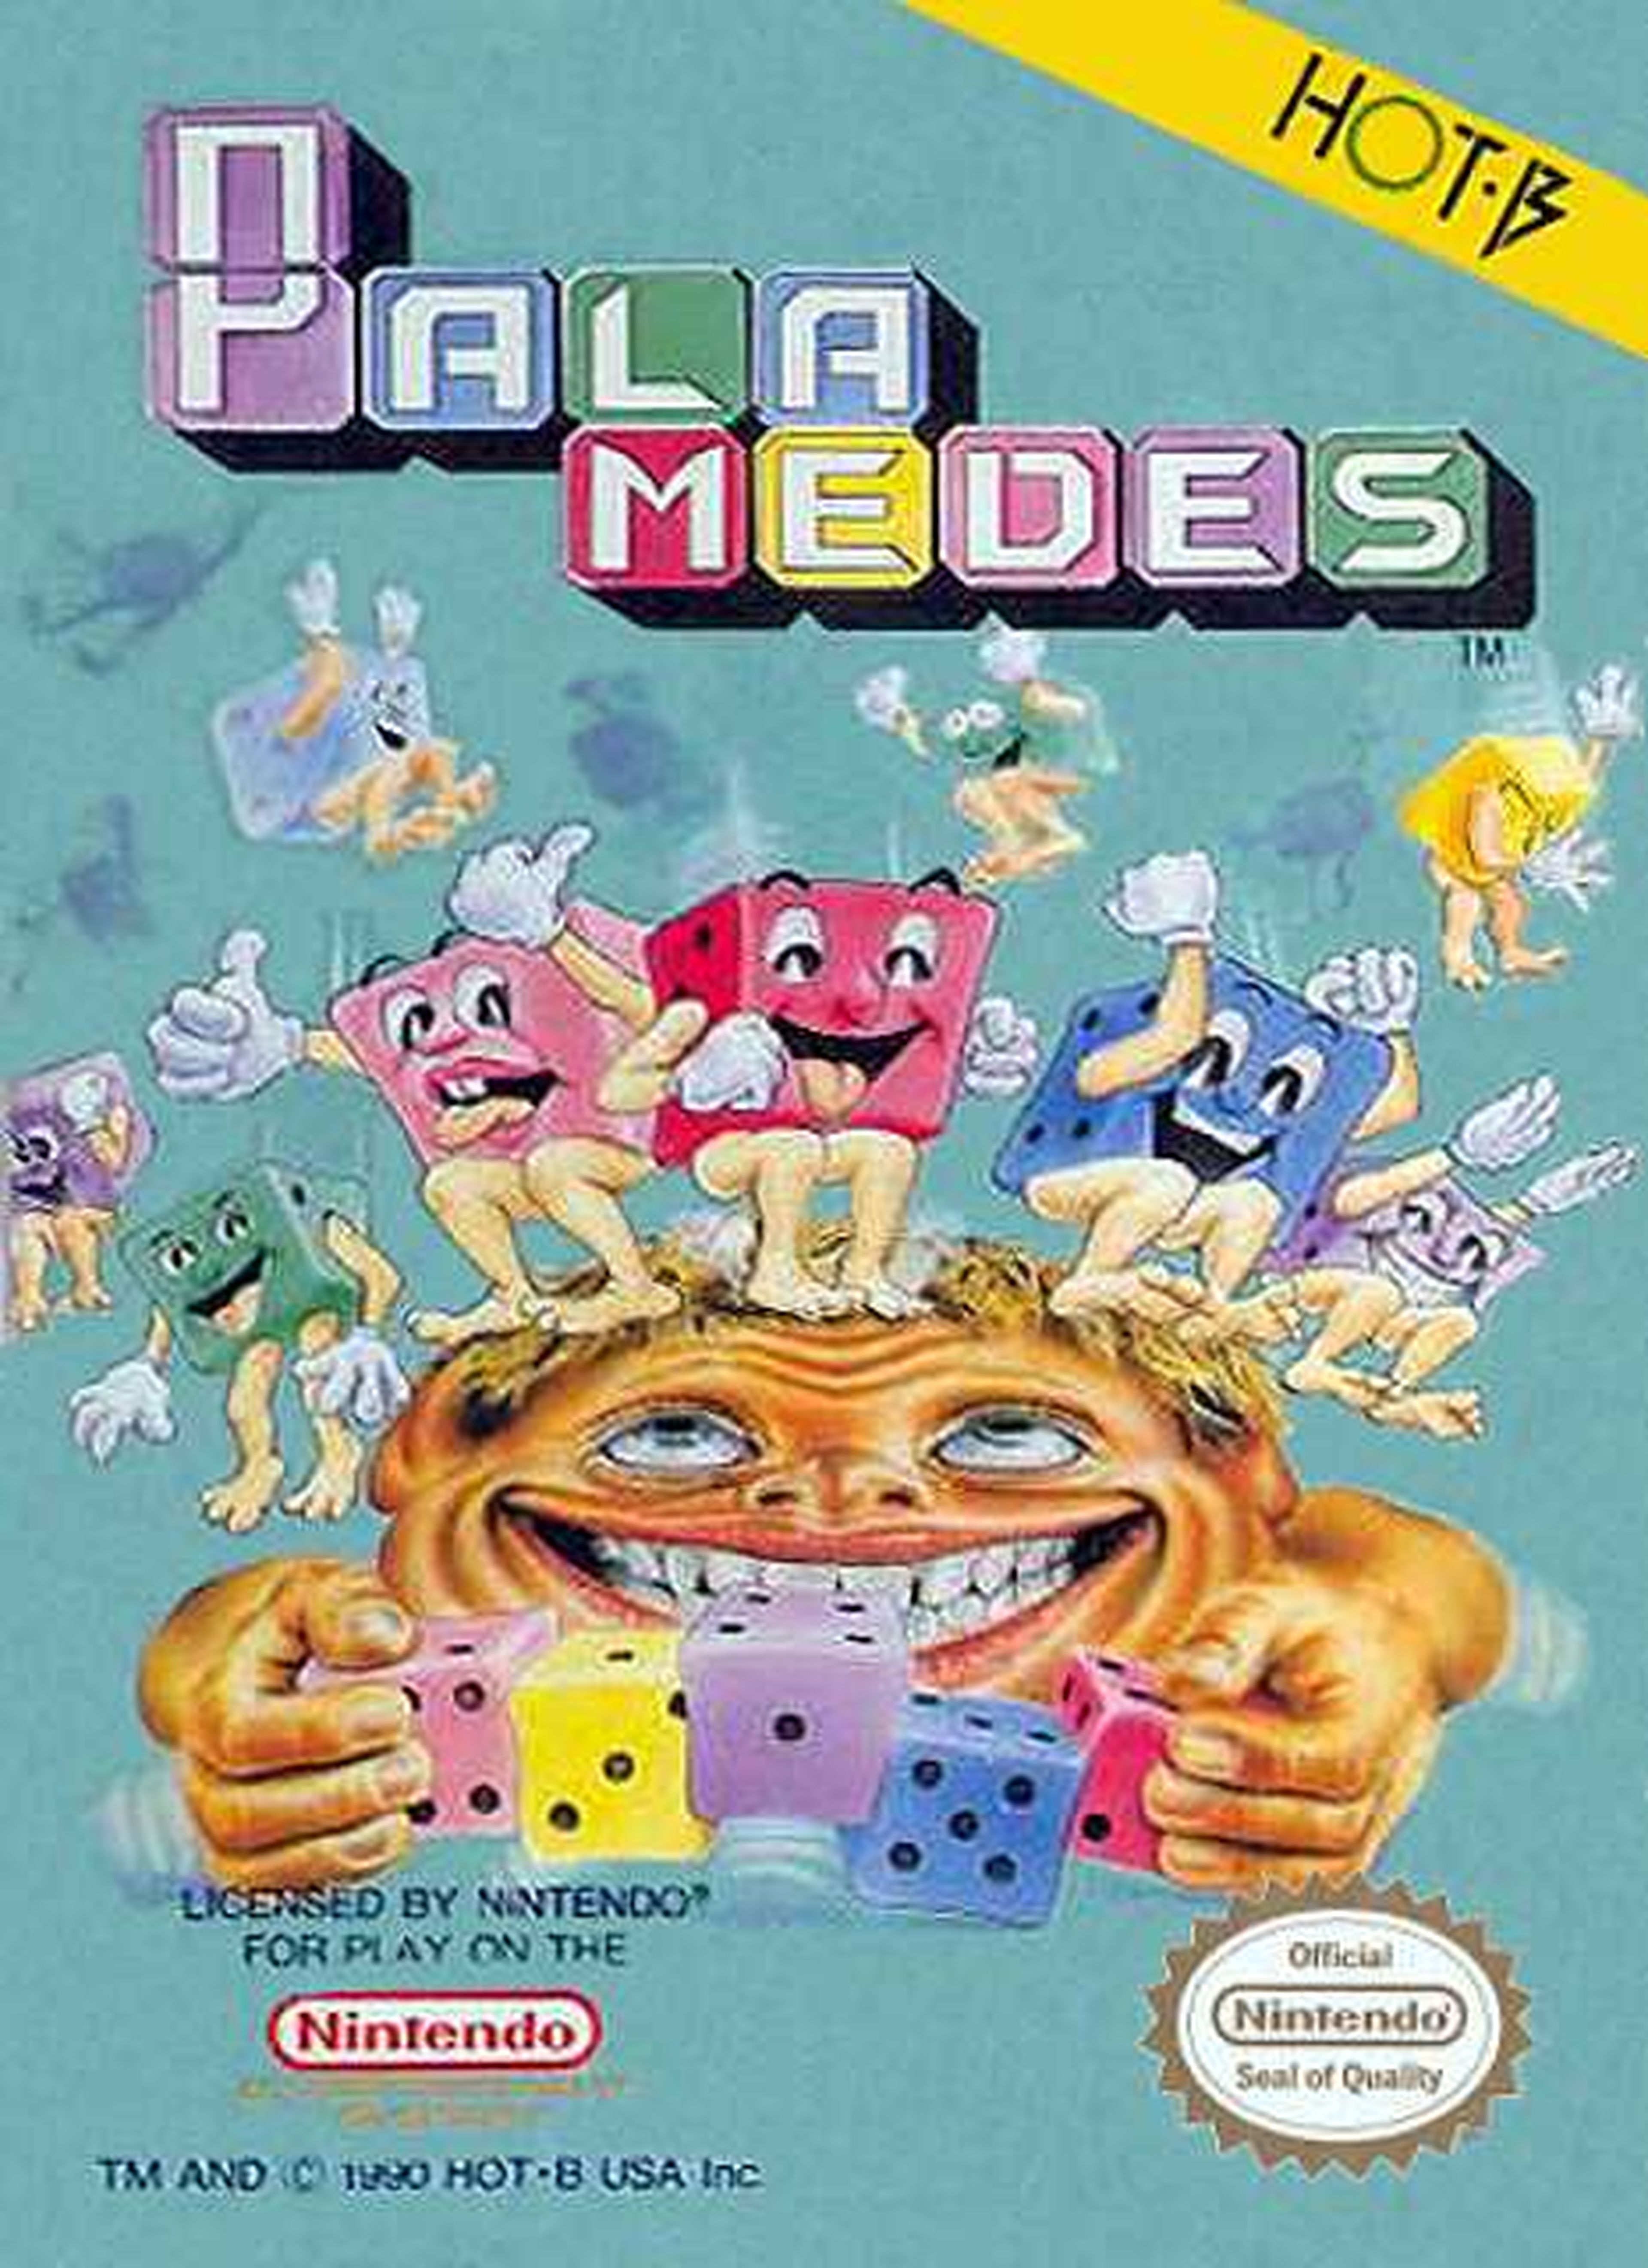 Hot nintendo. Palamedes игра. Palamedes (Video game). Пазлы 1990 года. Palamedes.